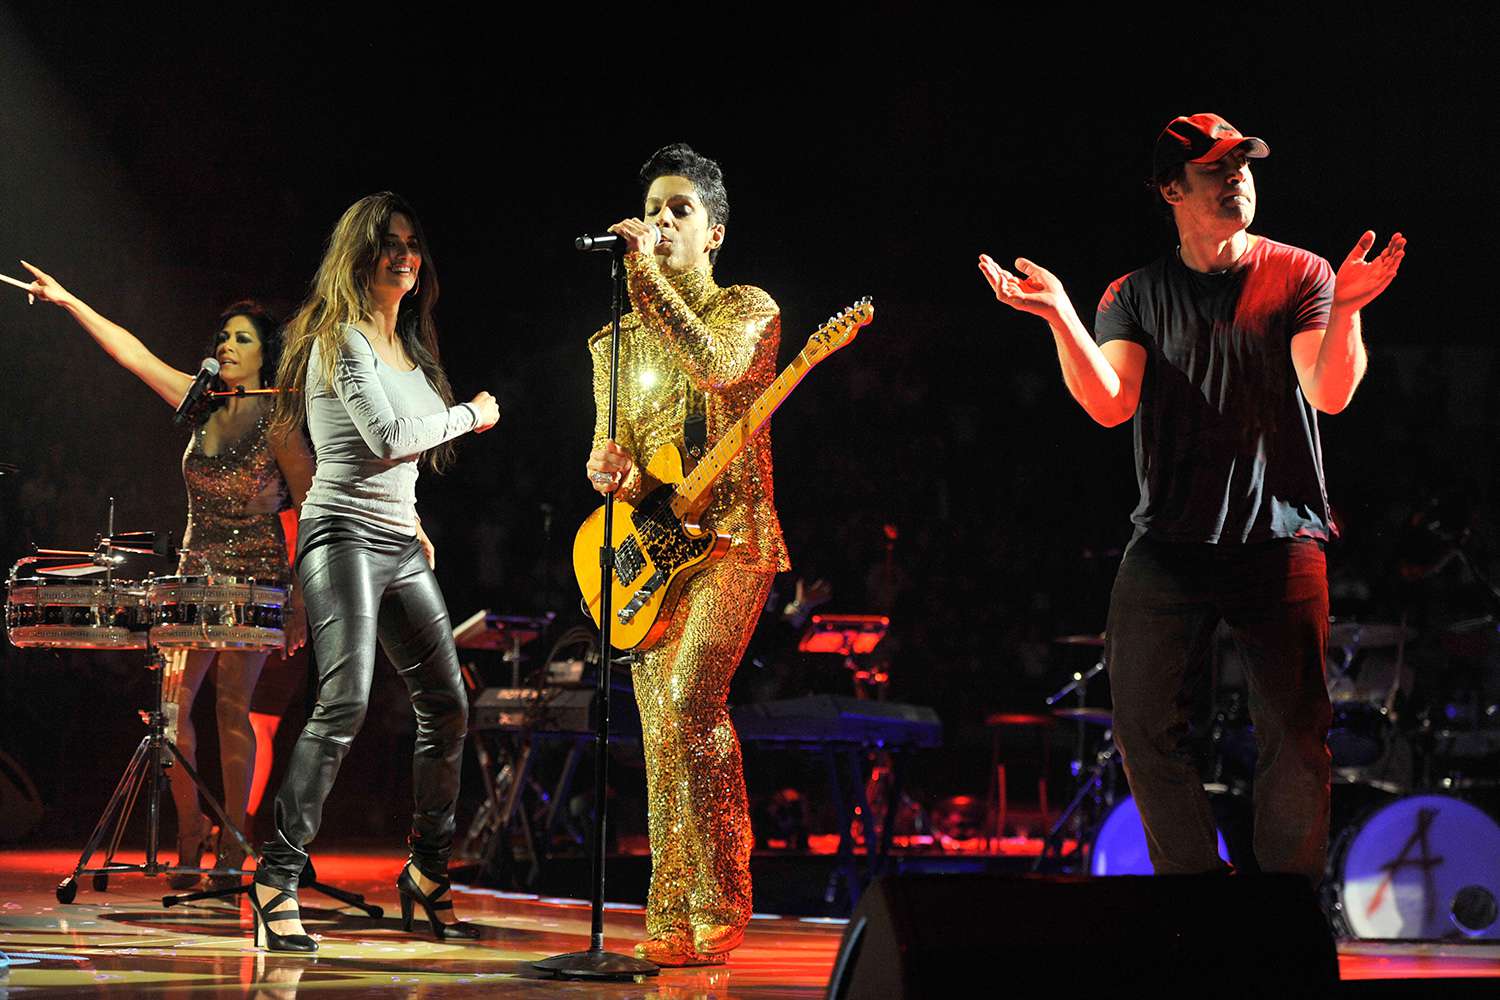 Penelope Cruz and Javier Bardem dance on stage while Prince performs